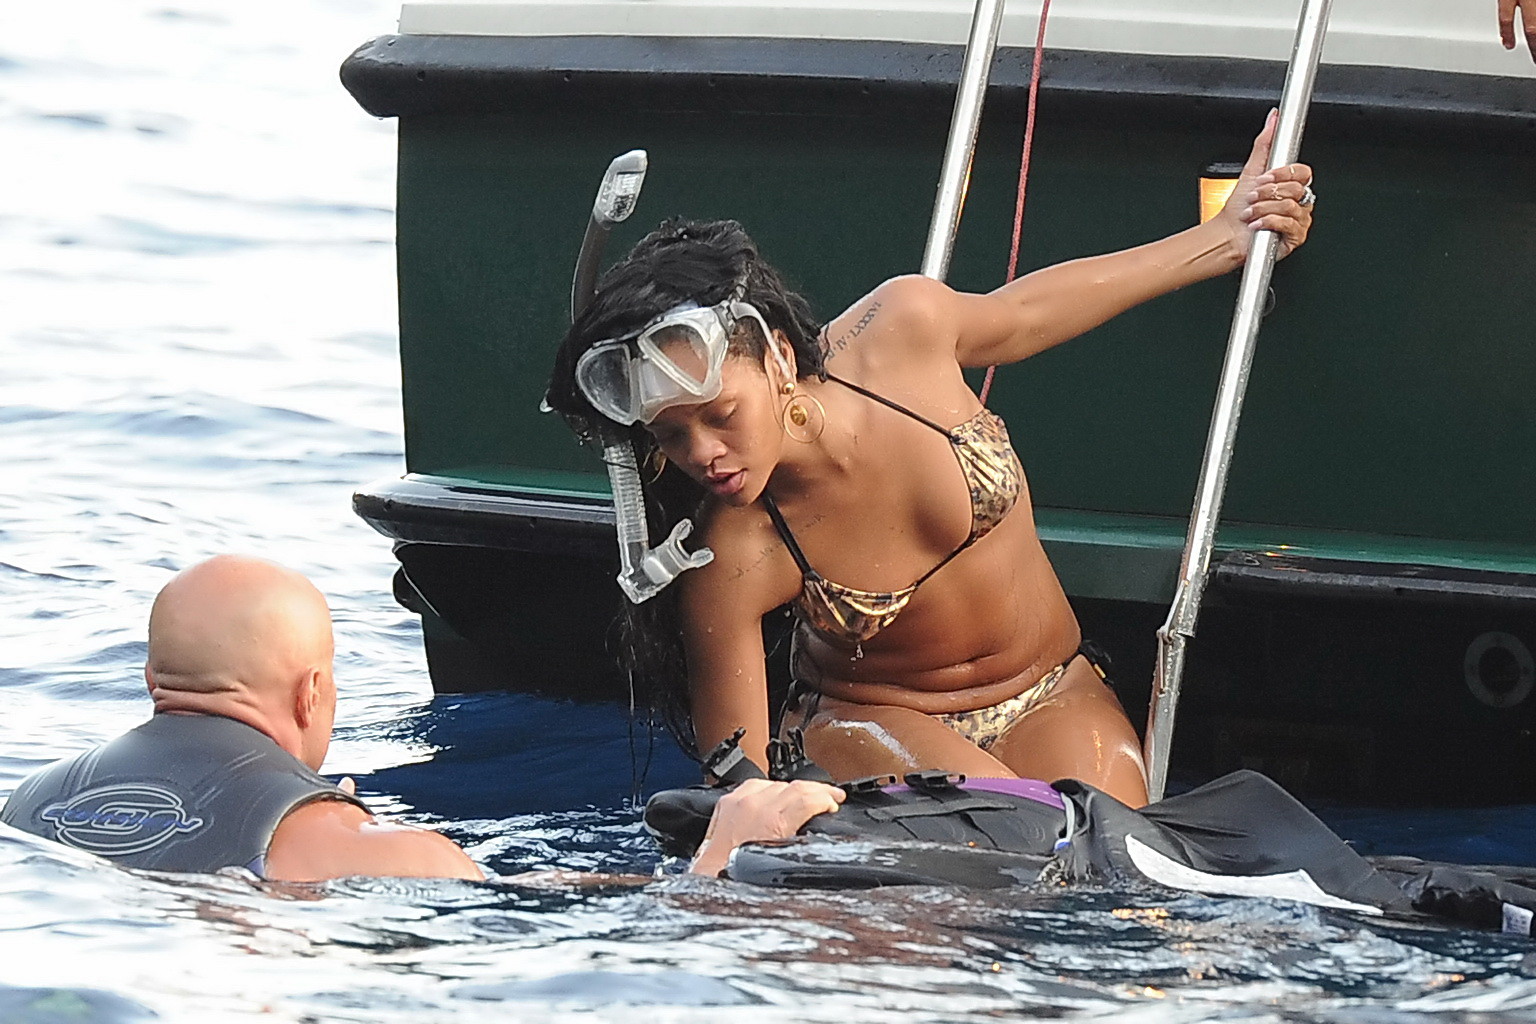 Rihanna showing off her wet ass wearing tiny leopard print bikini at the boat in #79486780